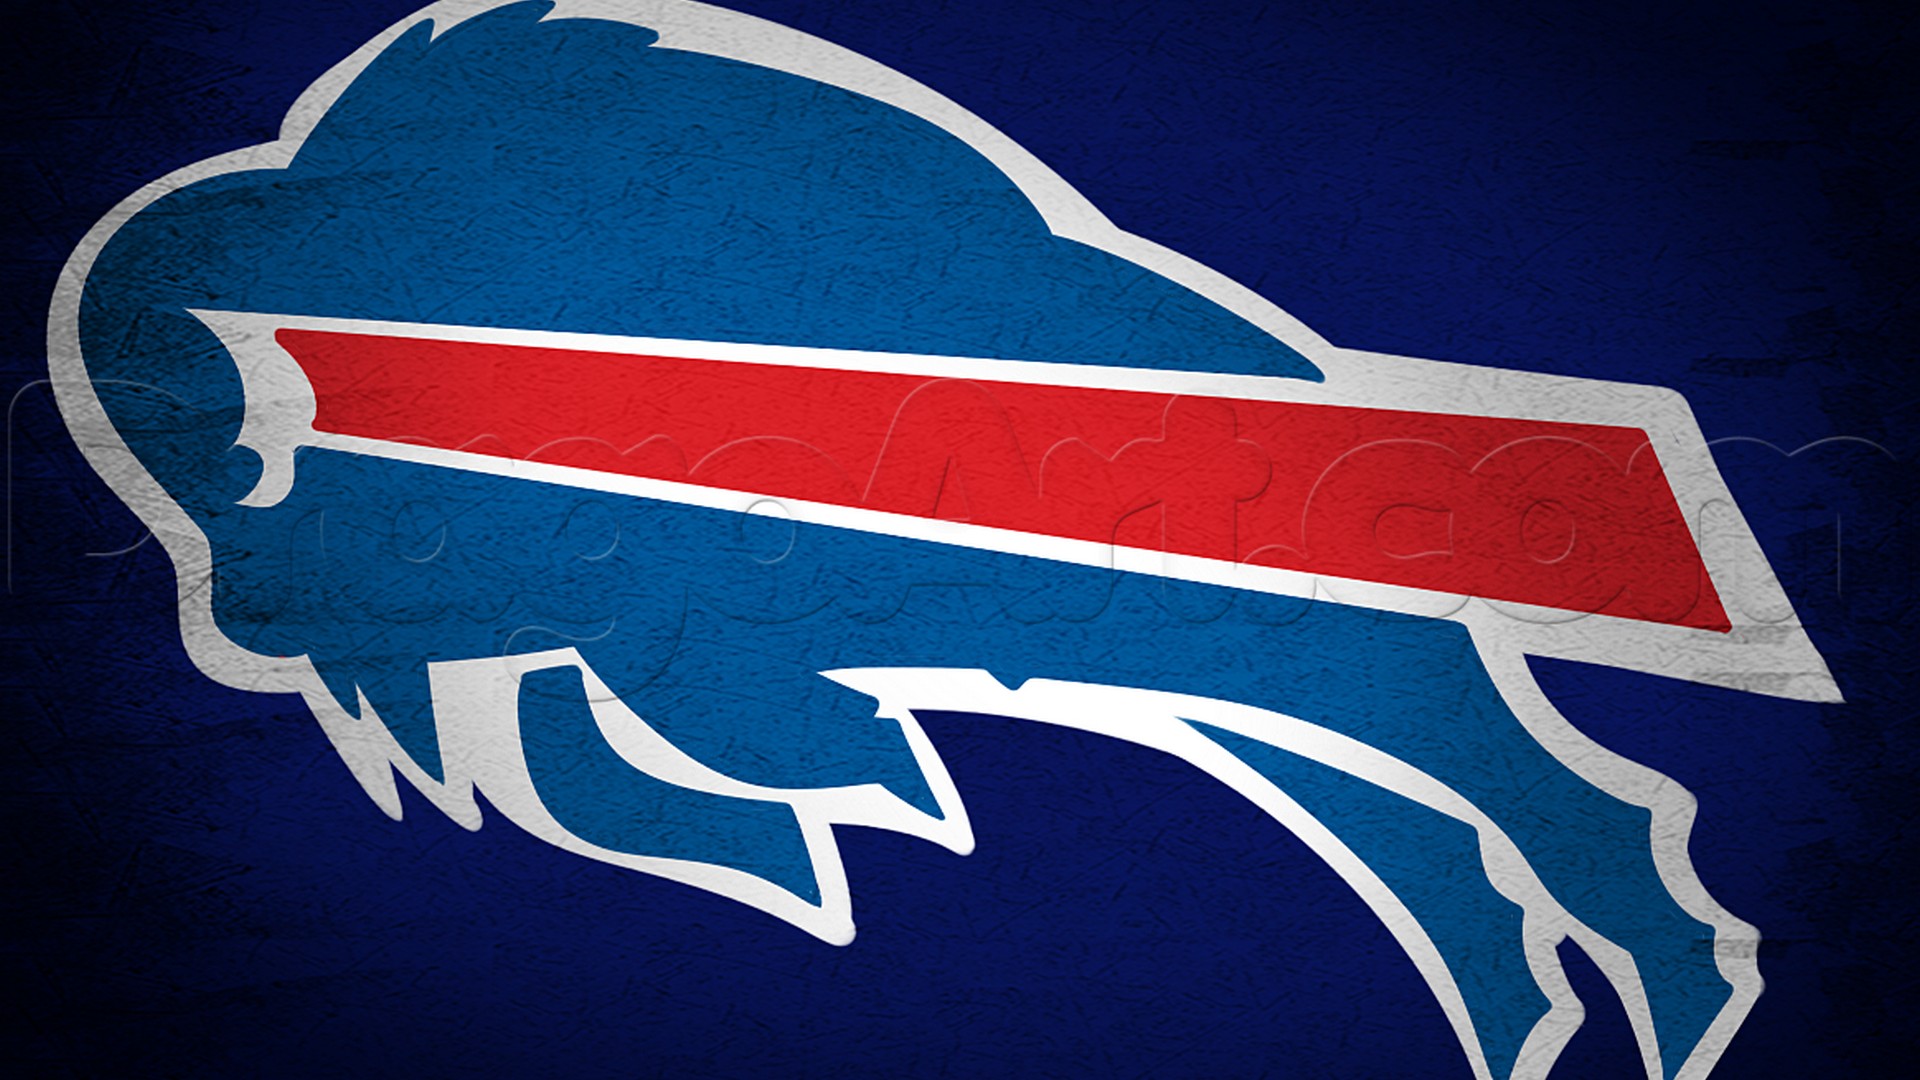 Windows Wallpaper Buffalo Bills NFL with high-resolution 1920x1080 pixel. You can use this wallpaper for your Mac or Windows Desktop Background, iPhone, Android or Tablet and another Smartphone device